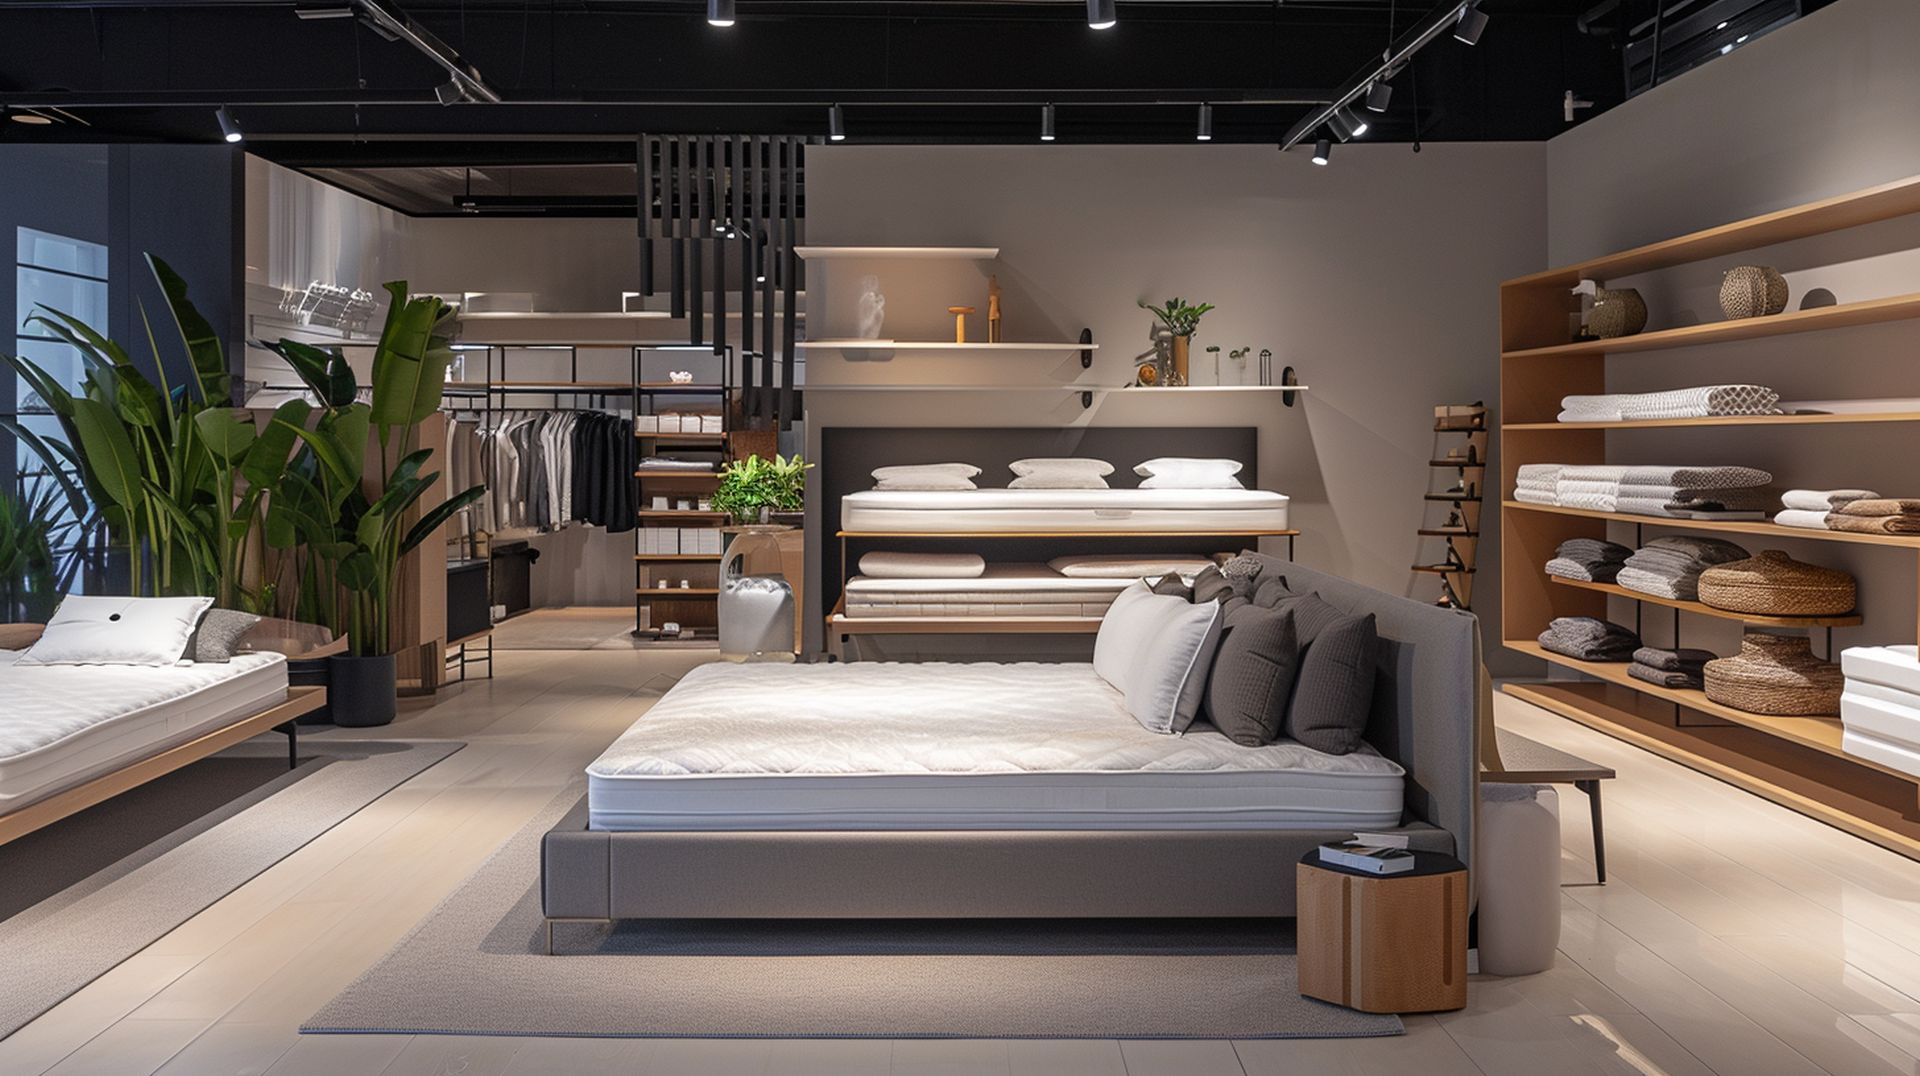 If you're looking for a new bed, mattress stores in South Gate offer the best customer and delivery service, financing, and warranties in California